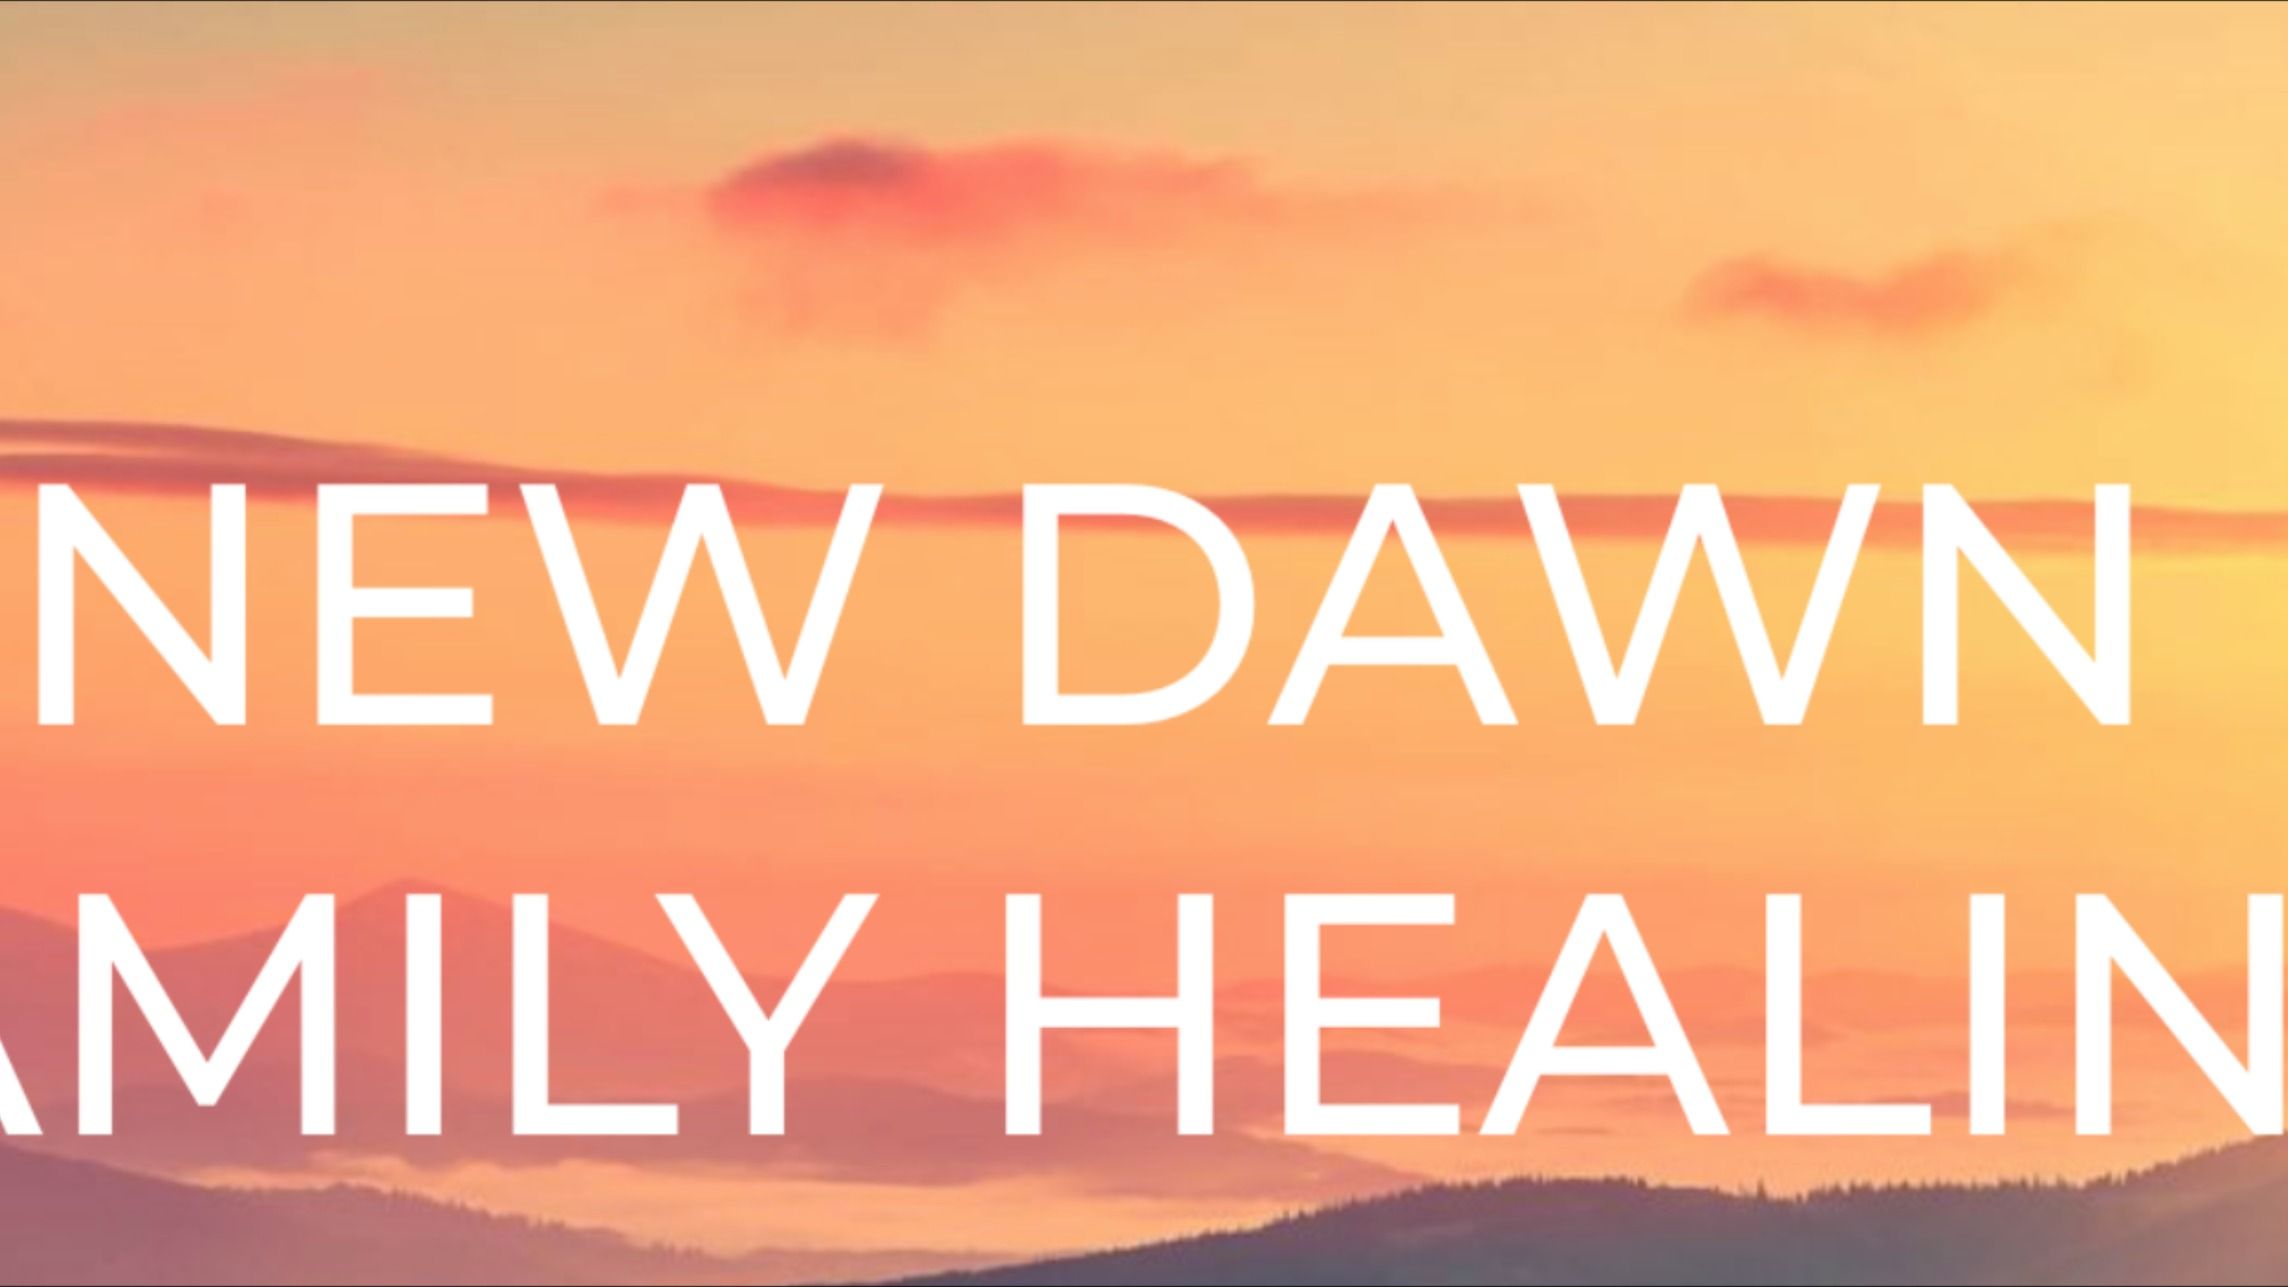 New Dawn Family Healing Cover Image